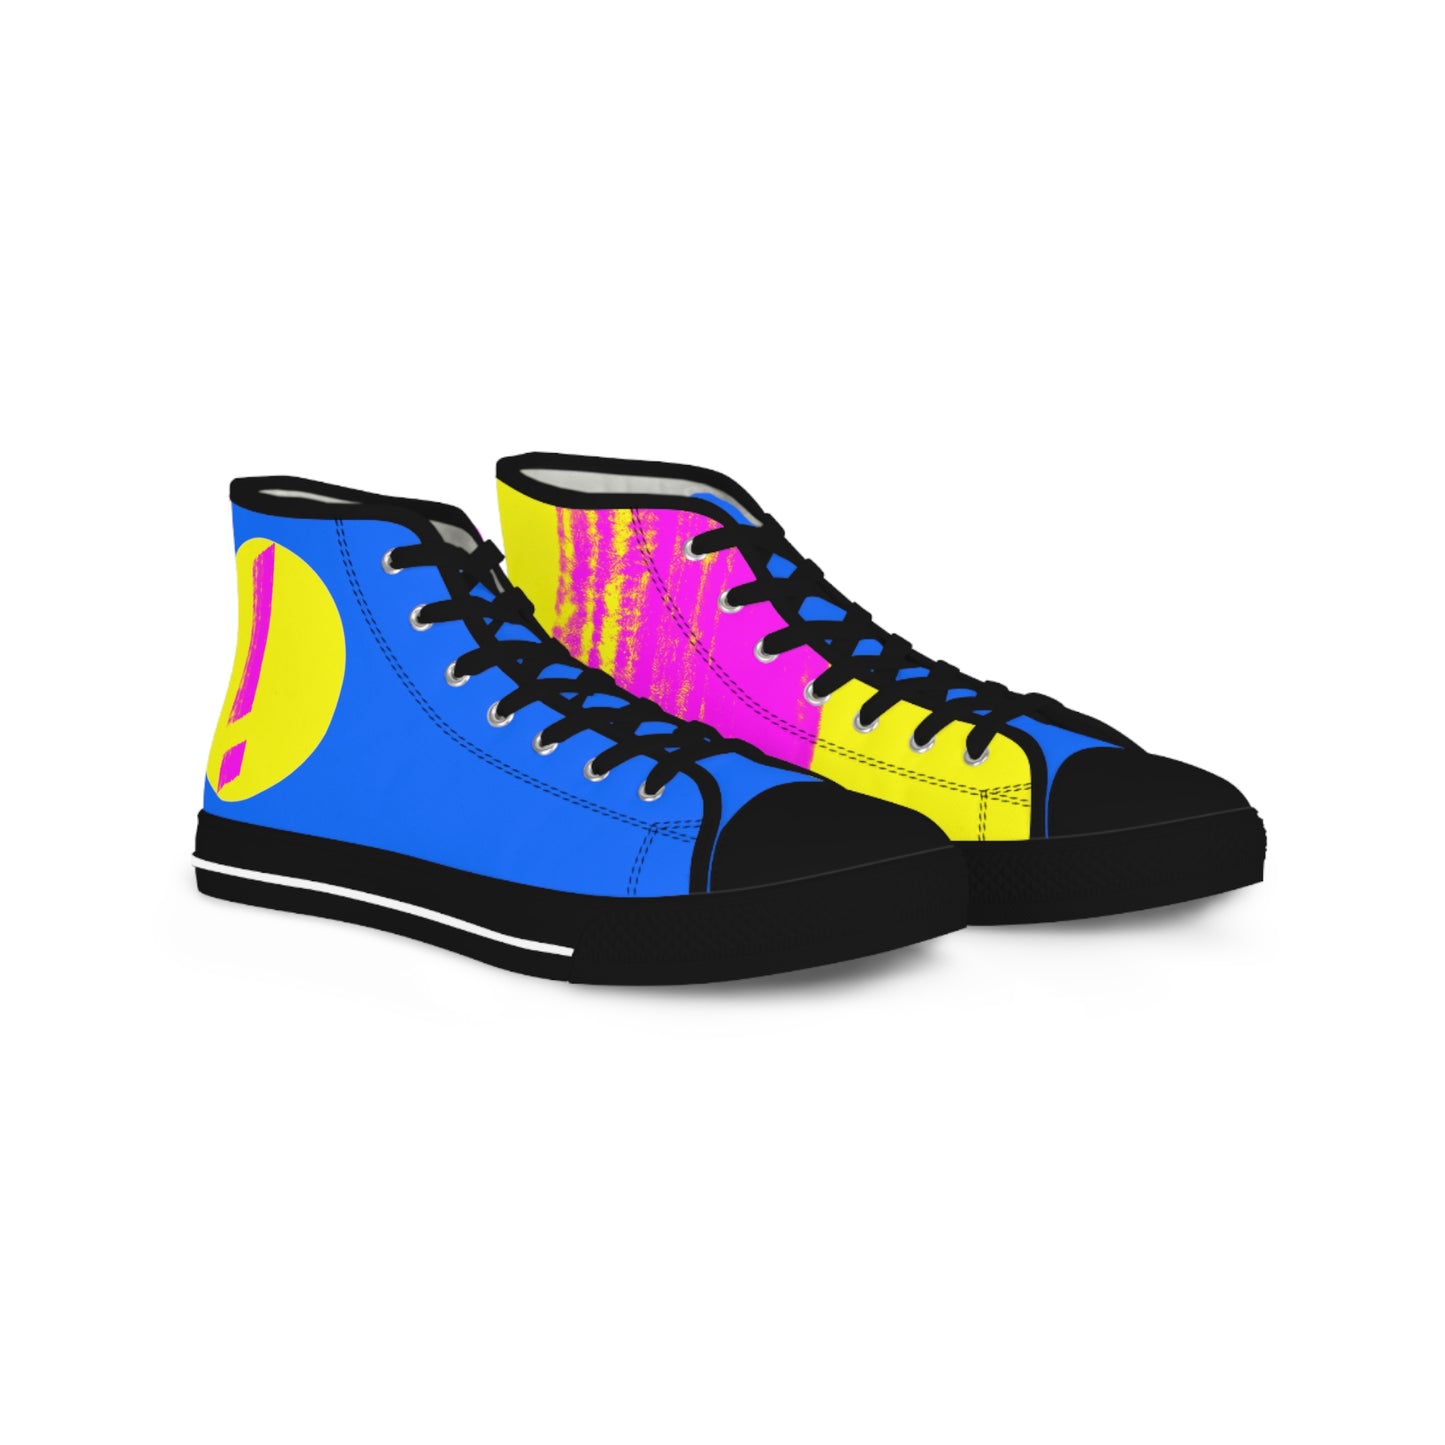 Limited Edition High Top Sneakers - !